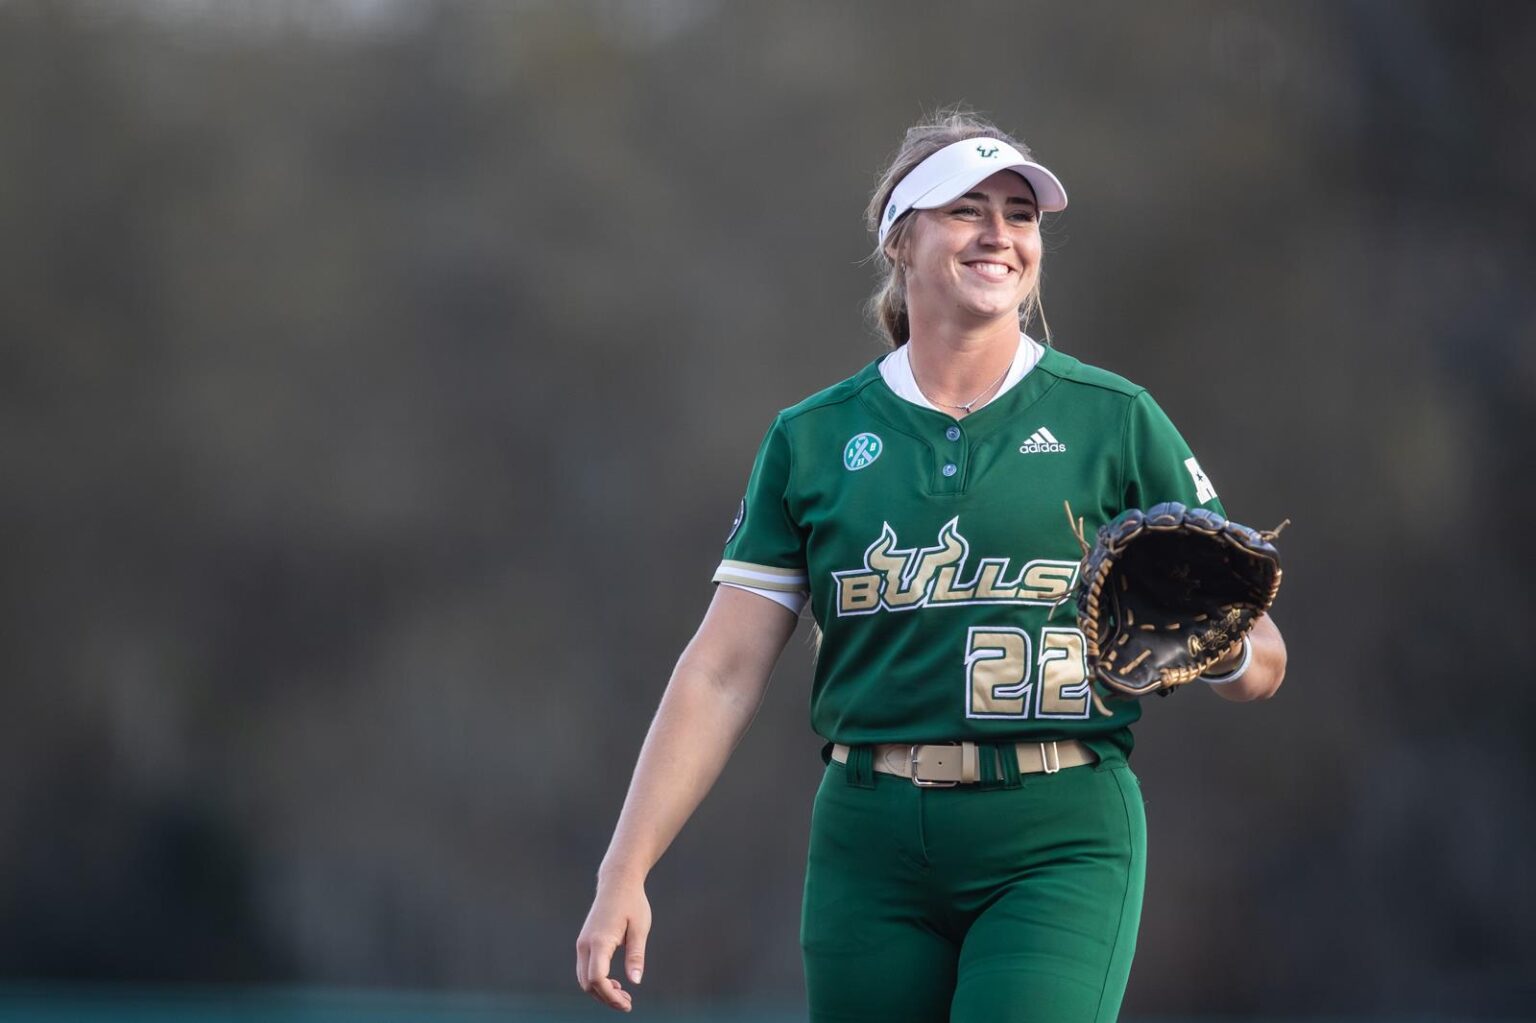 NOTEBOOK Corrick nears strikeout record, track impresses at Hurricane